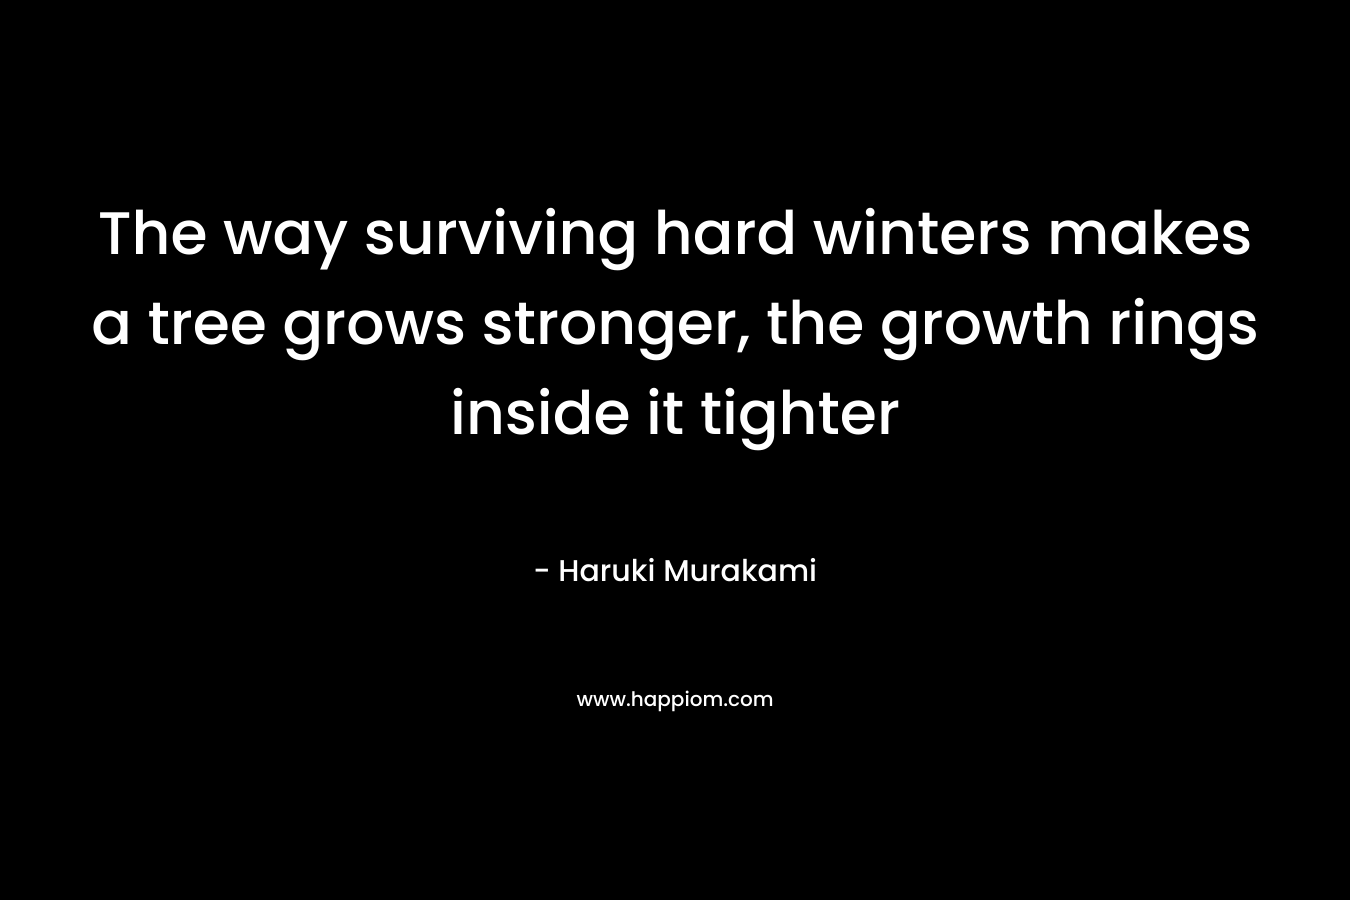 The way surviving hard winters makes a tree grows stronger, the growth rings inside it tighter – Haruki Murakami